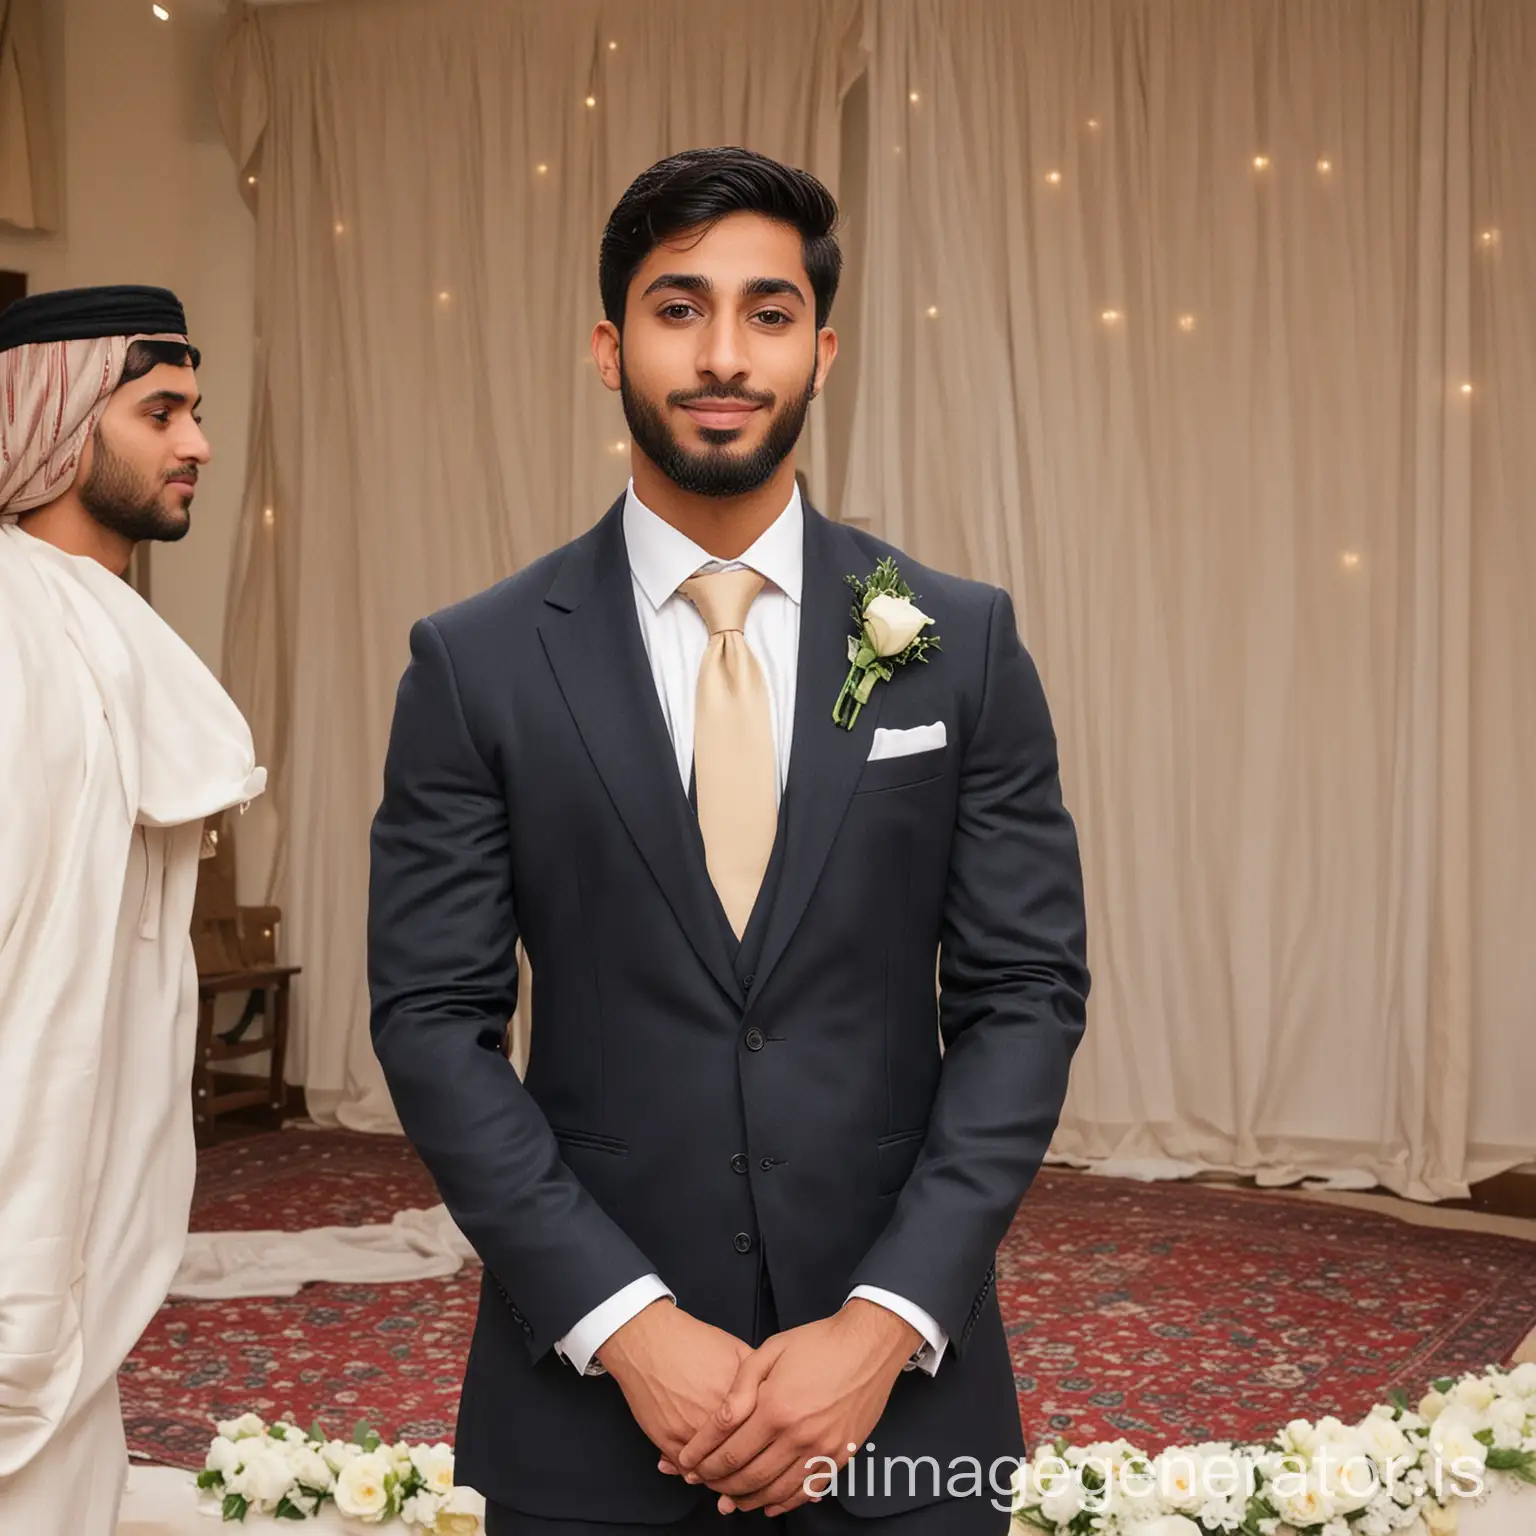 half Lombard language speaker and half Pakistani Punjabi male young man in suit with tie in wedding Muslim with Muslim attire